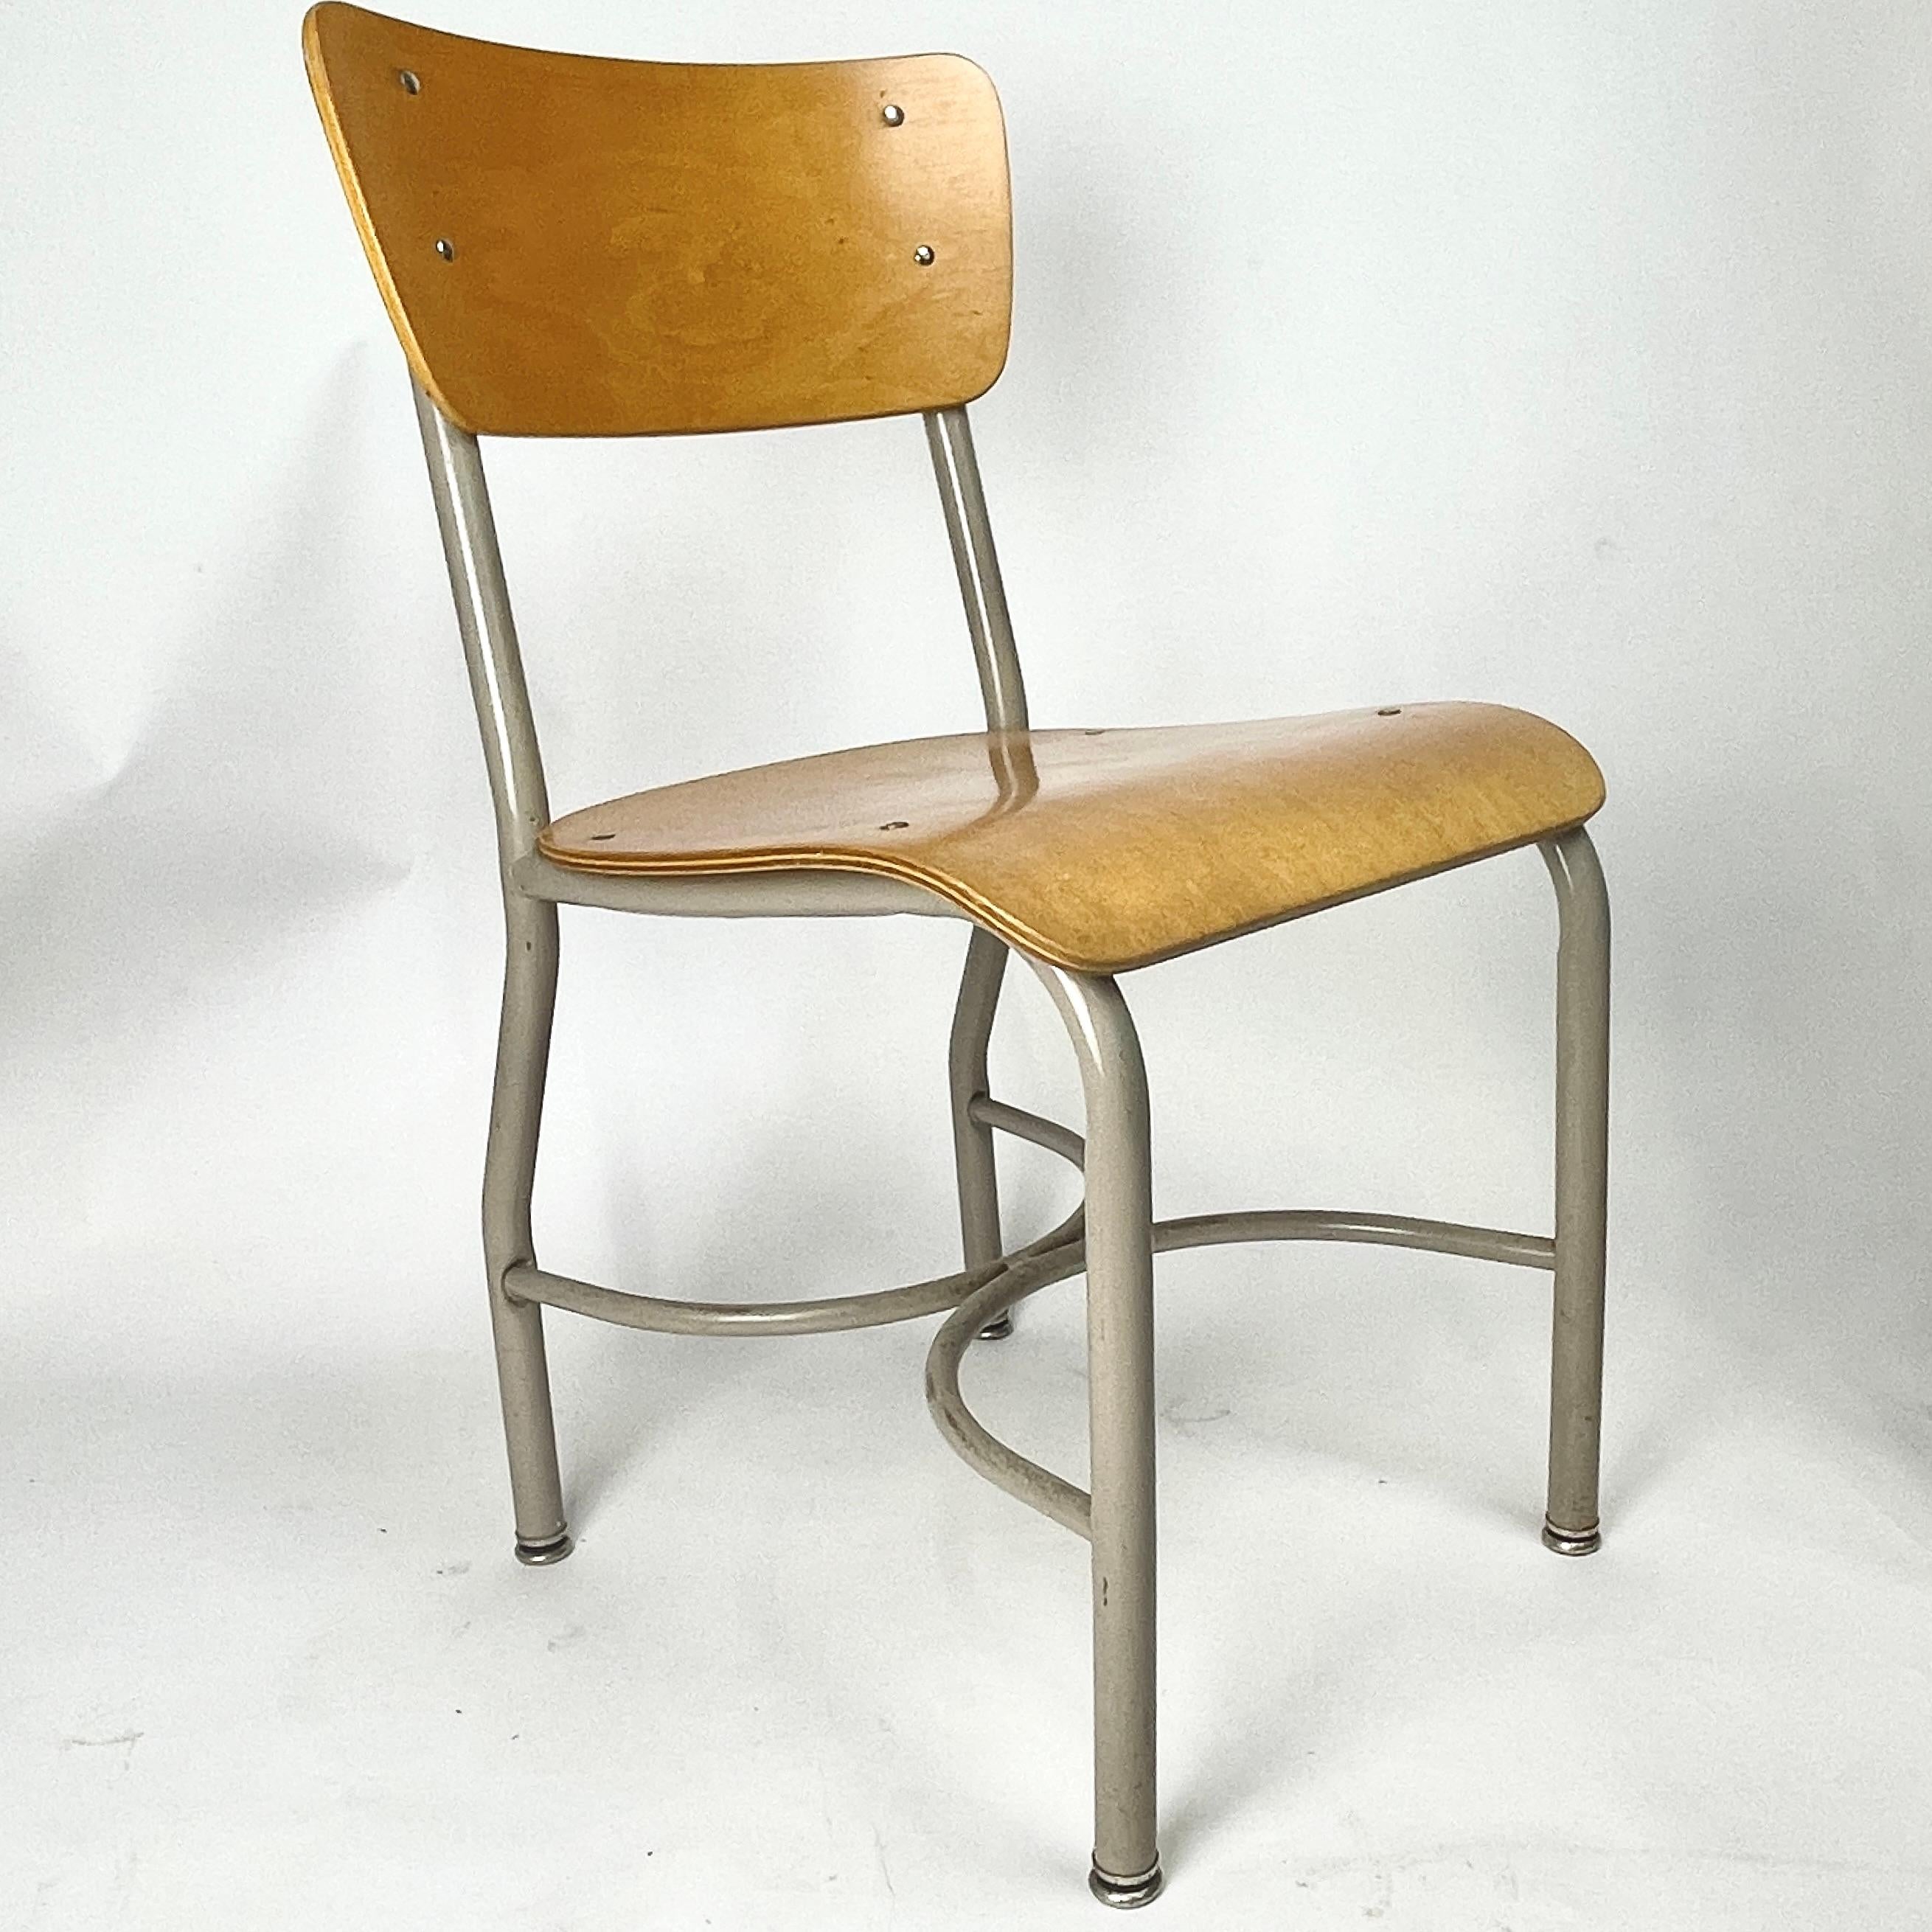 Painted Midcentury French Style Grey & Birch Plywood School or Cafe Chairs -35 Available For Sale